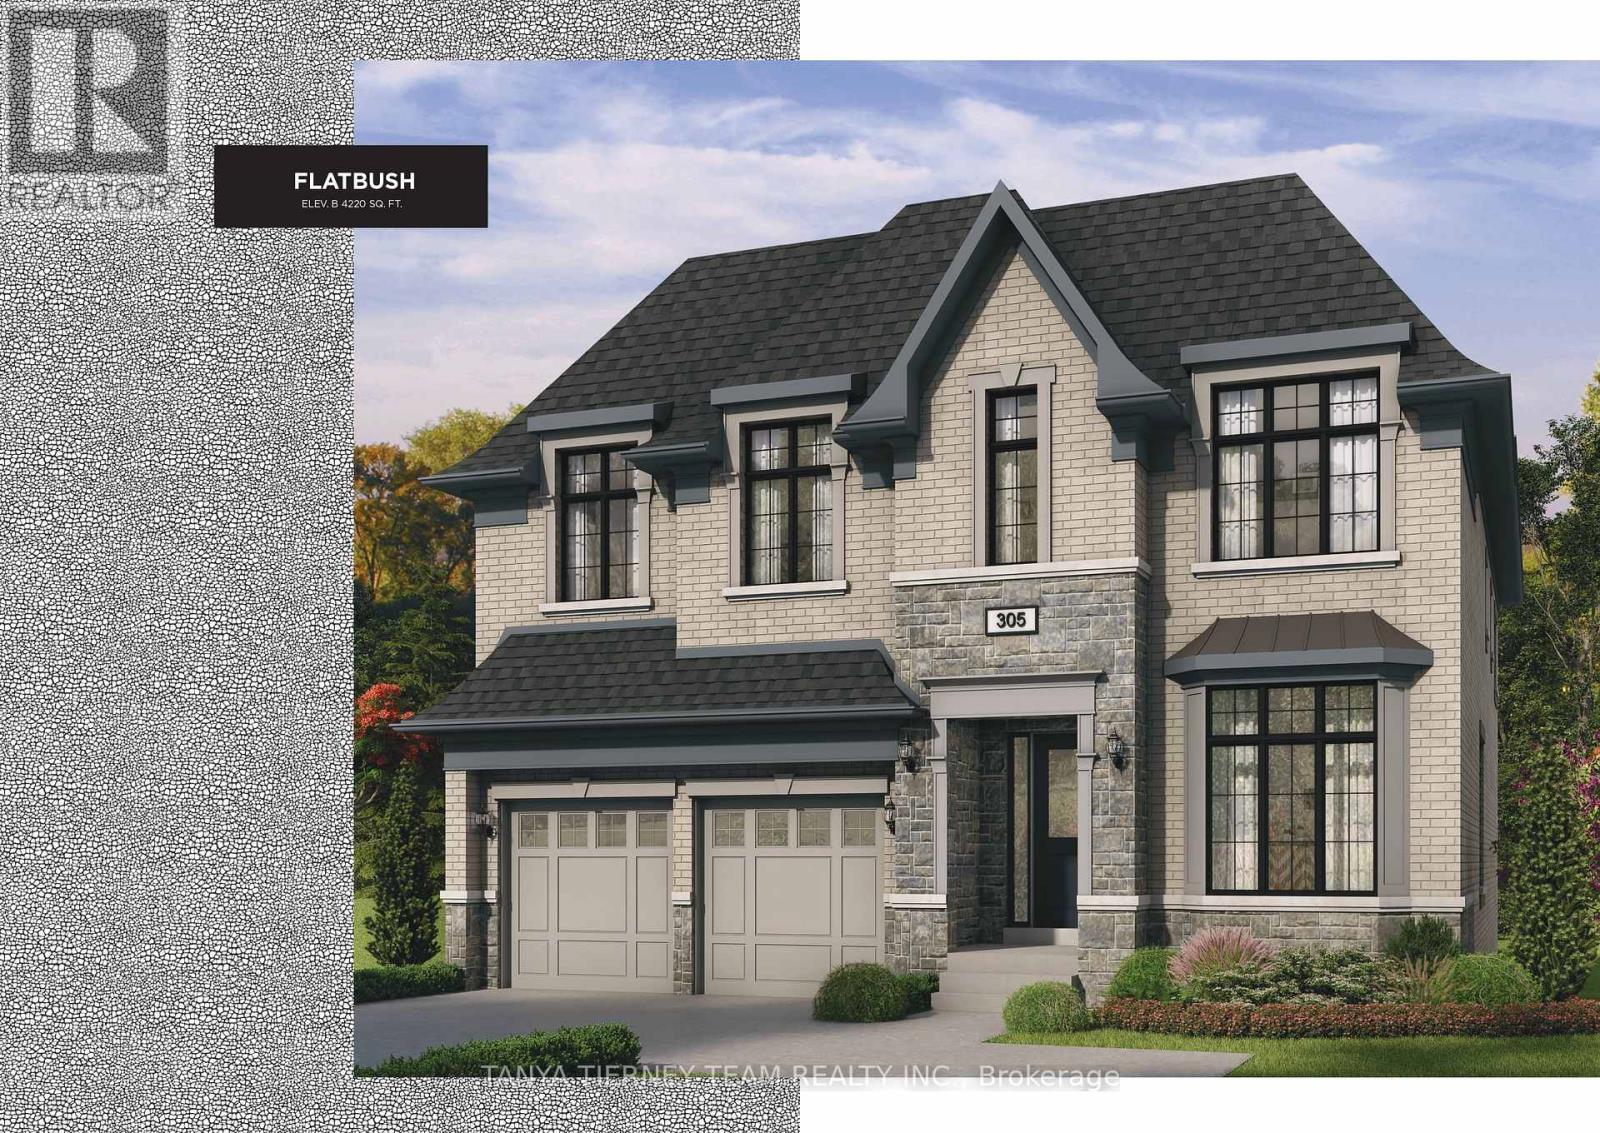 50 CARNWITH DR W located in Whitby, Ontario